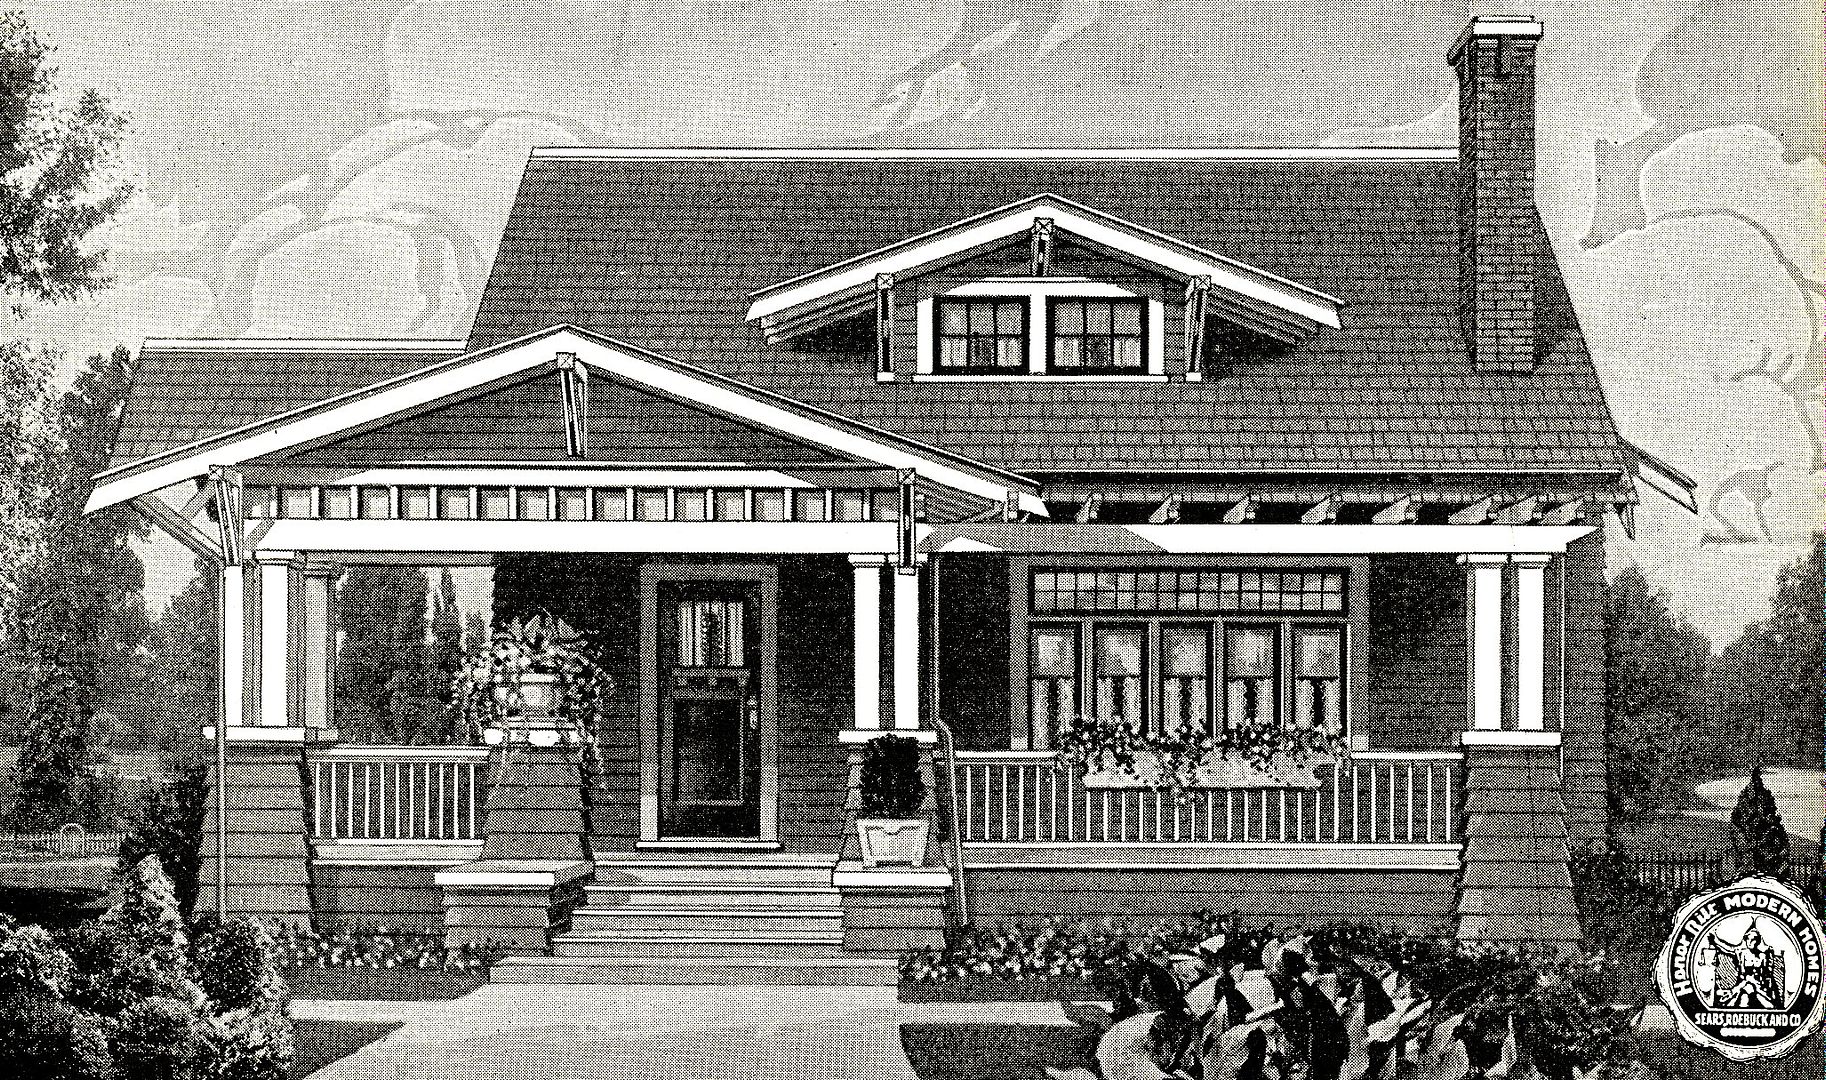 An image from the 1921 catalog shows that centered dormer. 